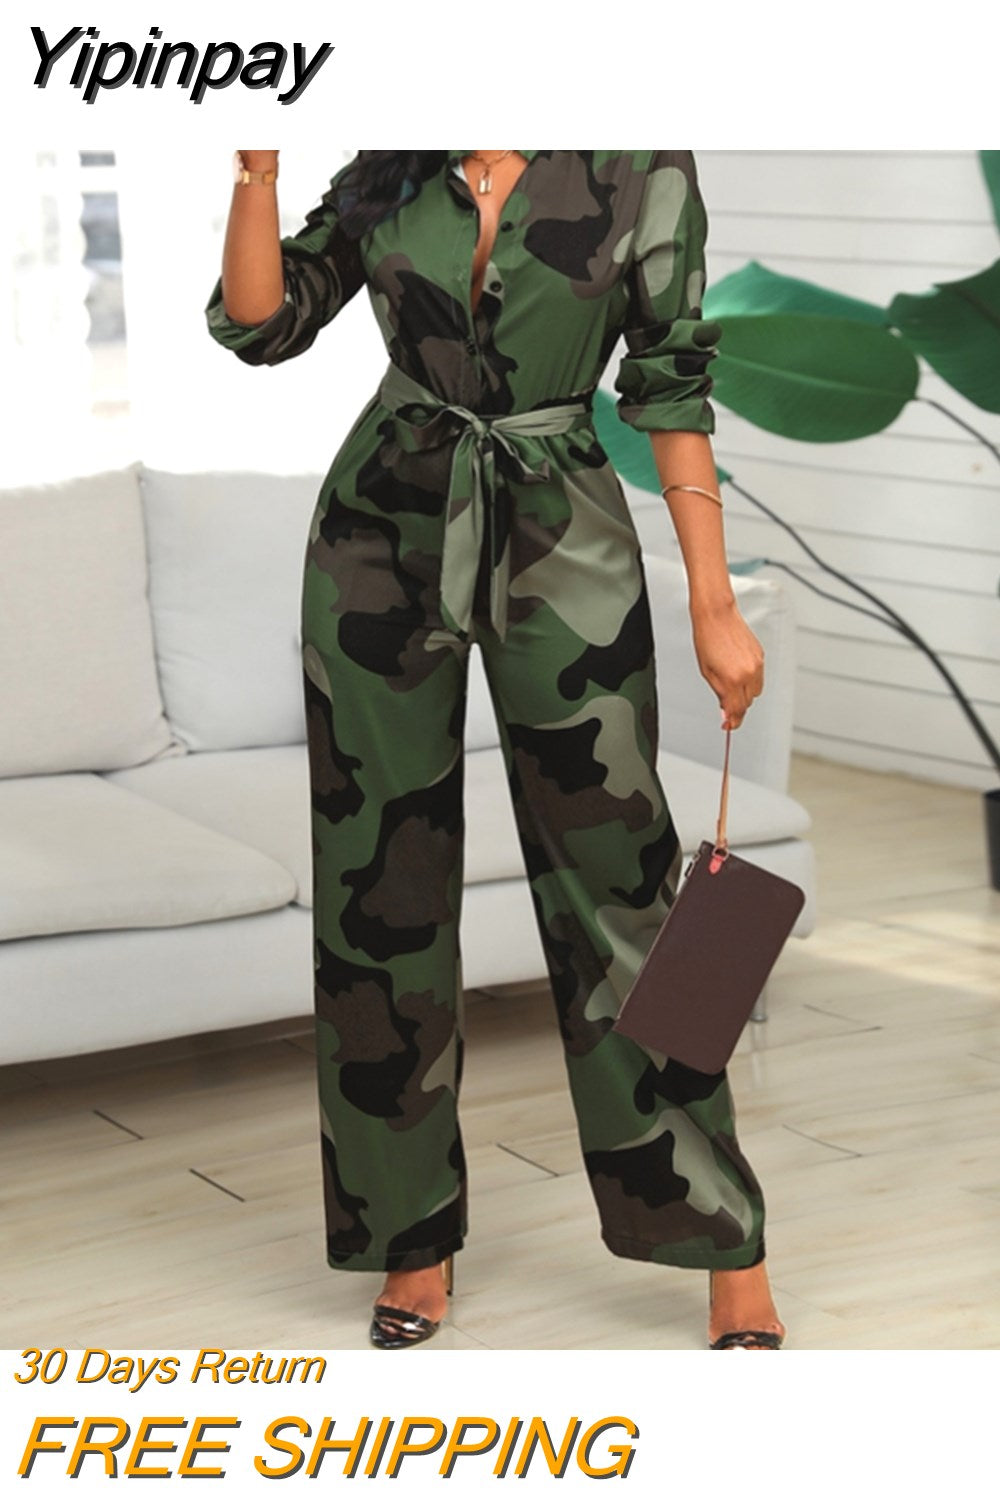 Yipinpay jumpsuit for women V Neck Camouflage Print Buttoned Jumpsuit one piece autumn ladies rompers female clothing outfits